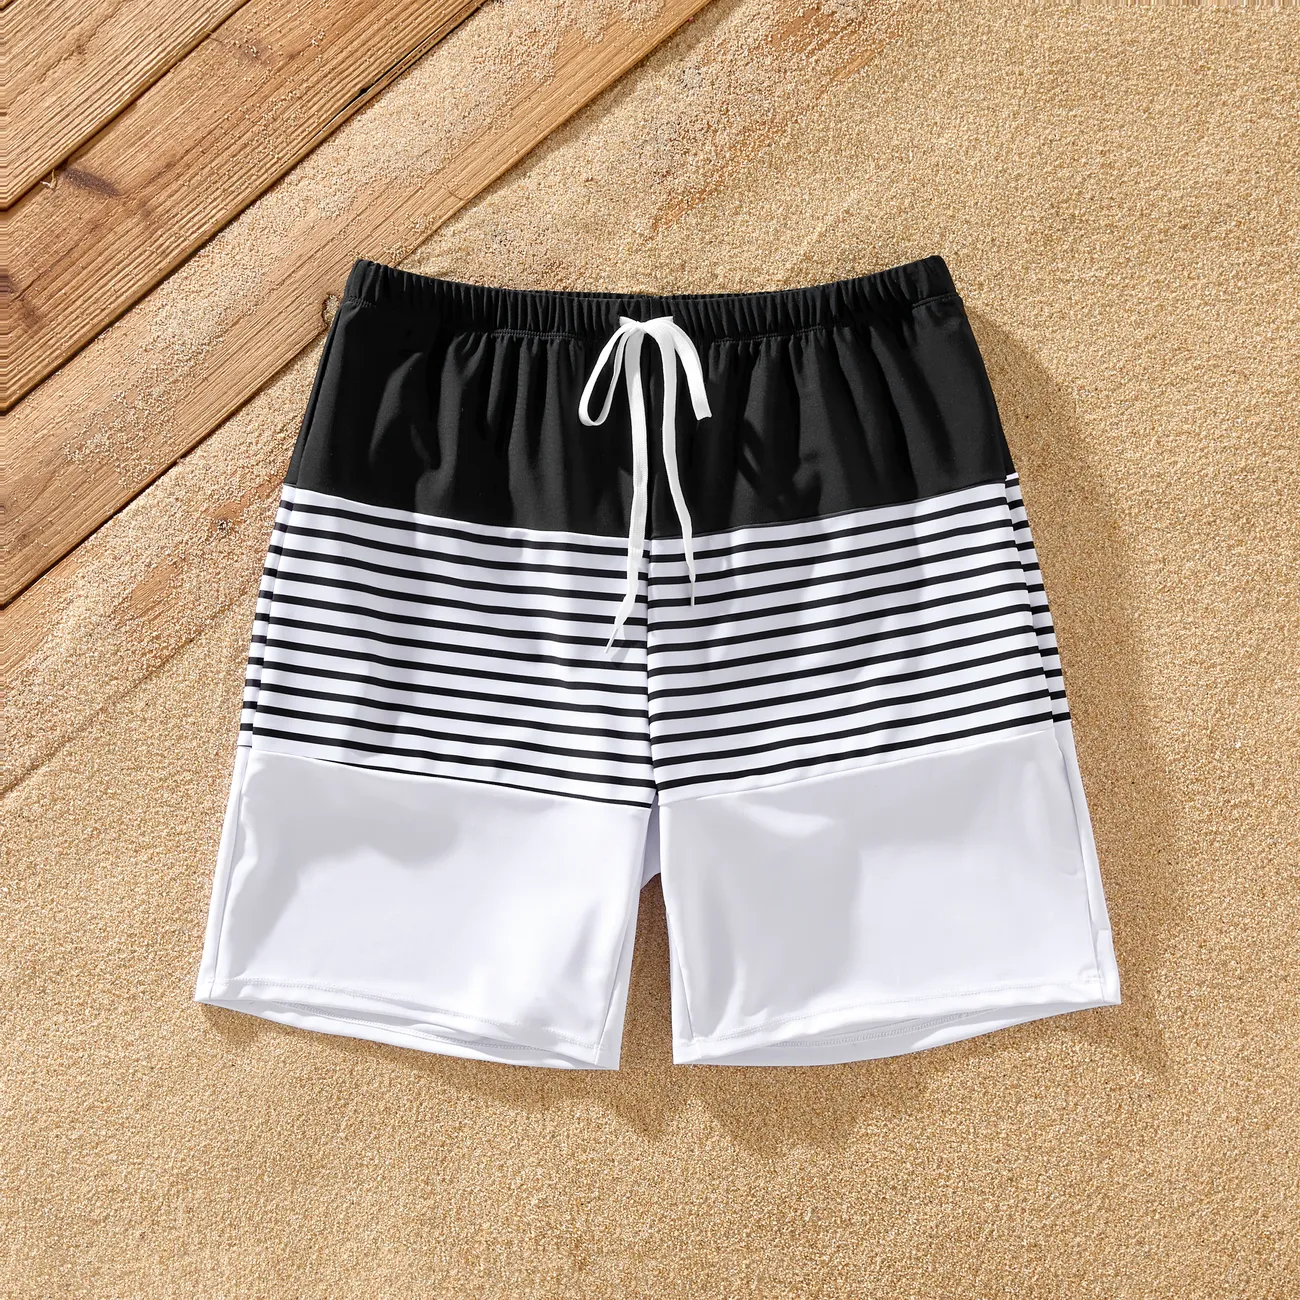 Family Matching Colorblock Stripe Swim Trunks or Floral Two-Piece Shirred Swimsuit Black big image 1